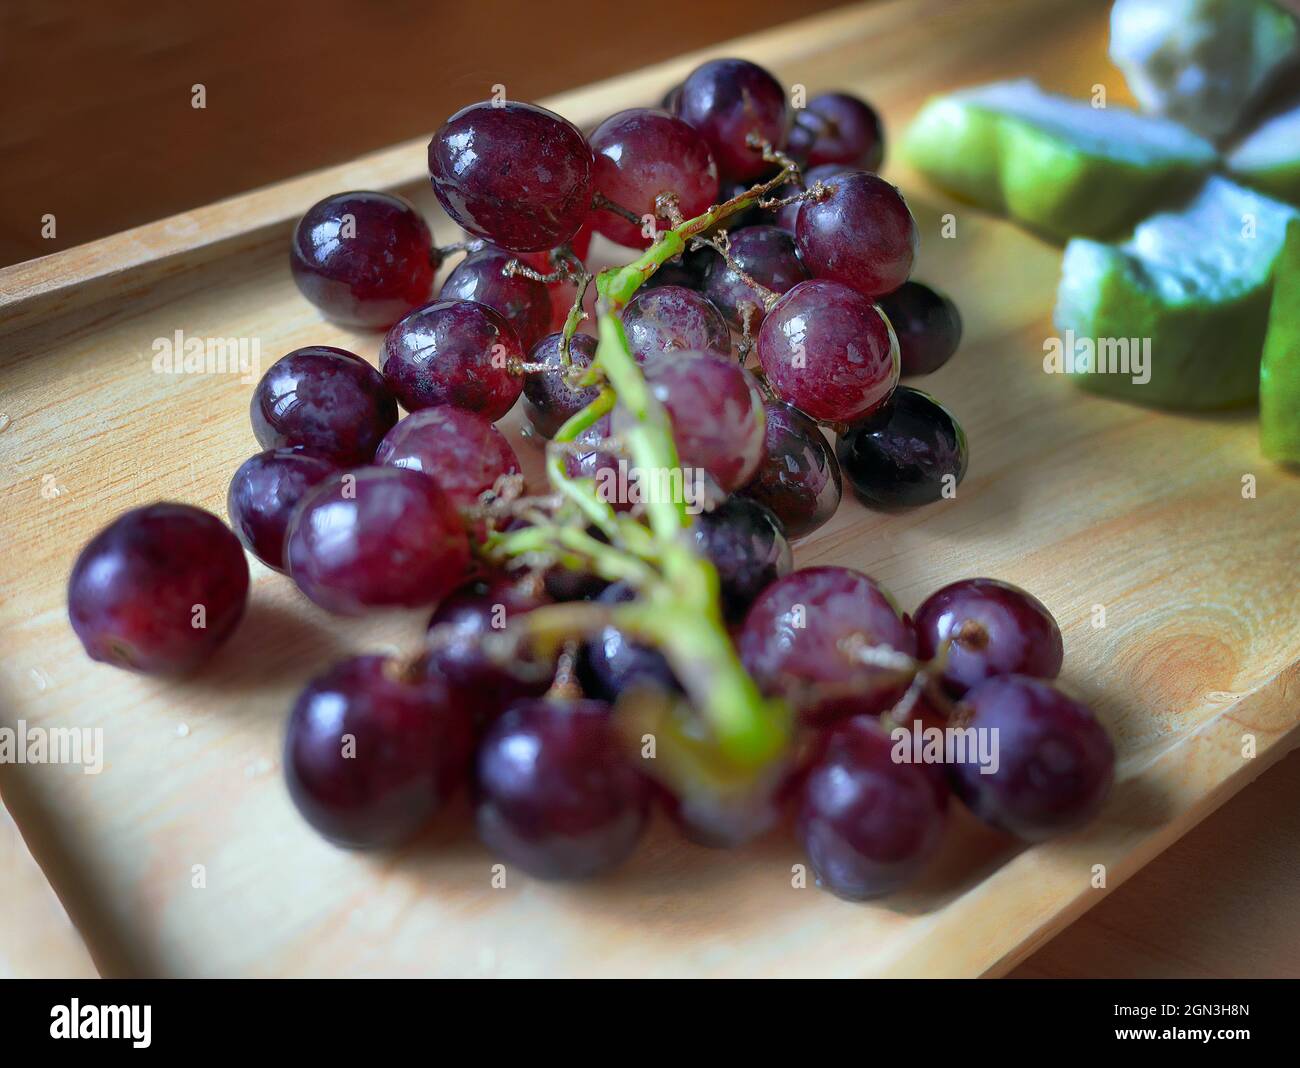 tasty sweet fresh bunch of deep red grapes on wooden tray Stock Photo